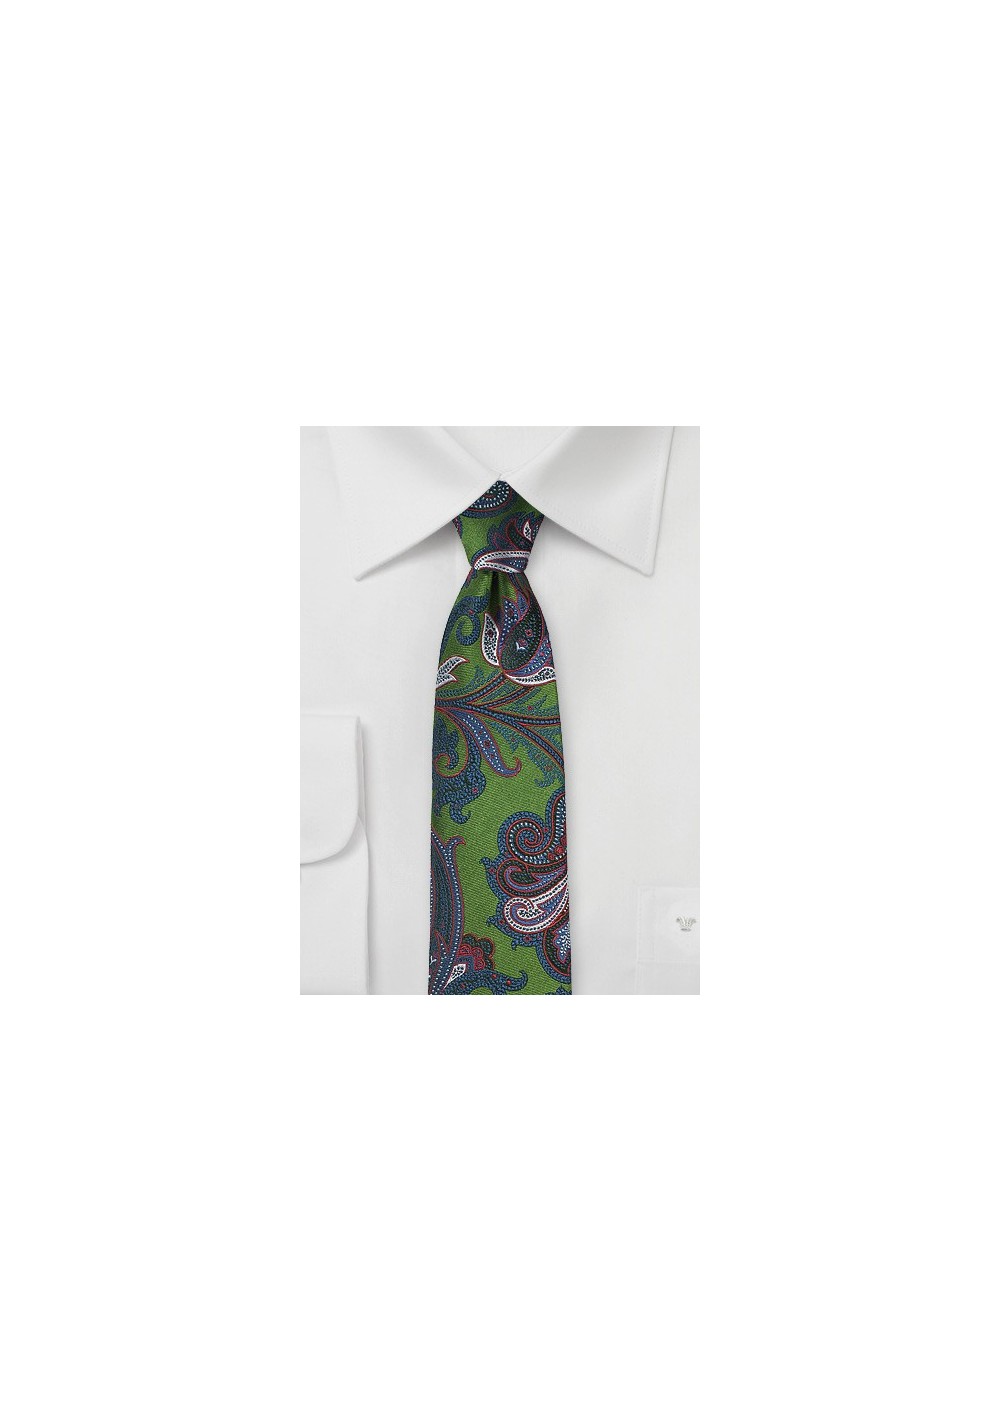 Trendy Paisley Tie in Dill Green